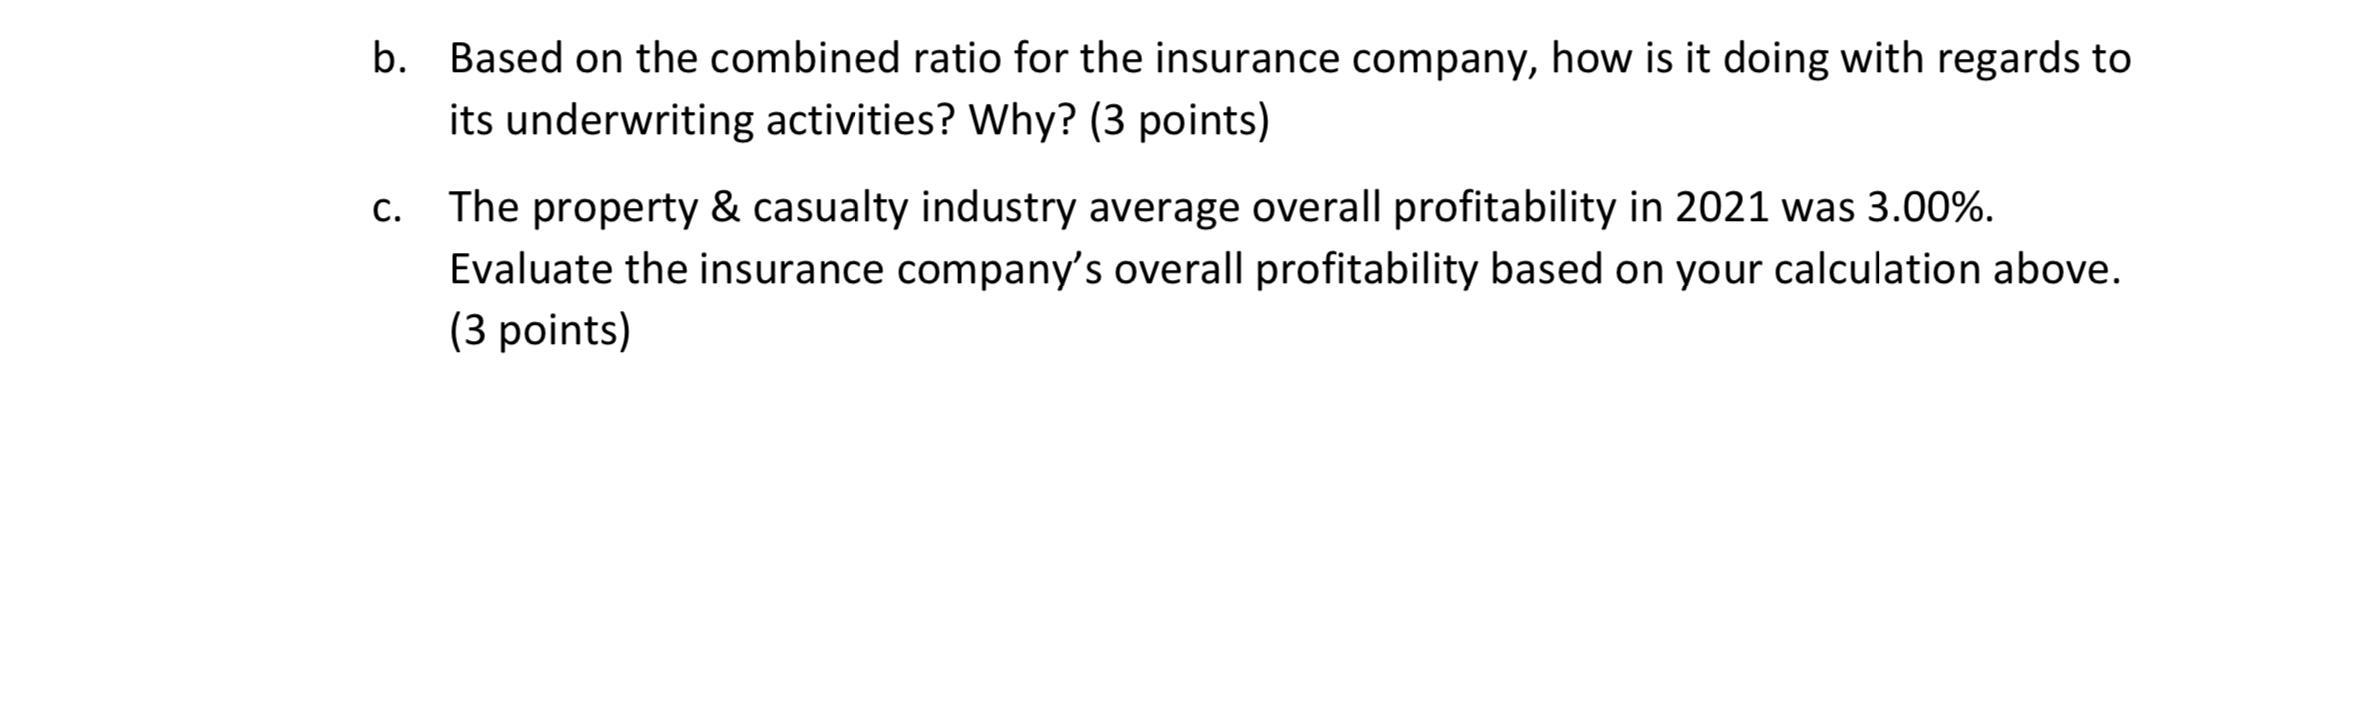 b. Based on the combined ratio for the insurance company, how is it doing with regards to its underwriting activities? Why? (